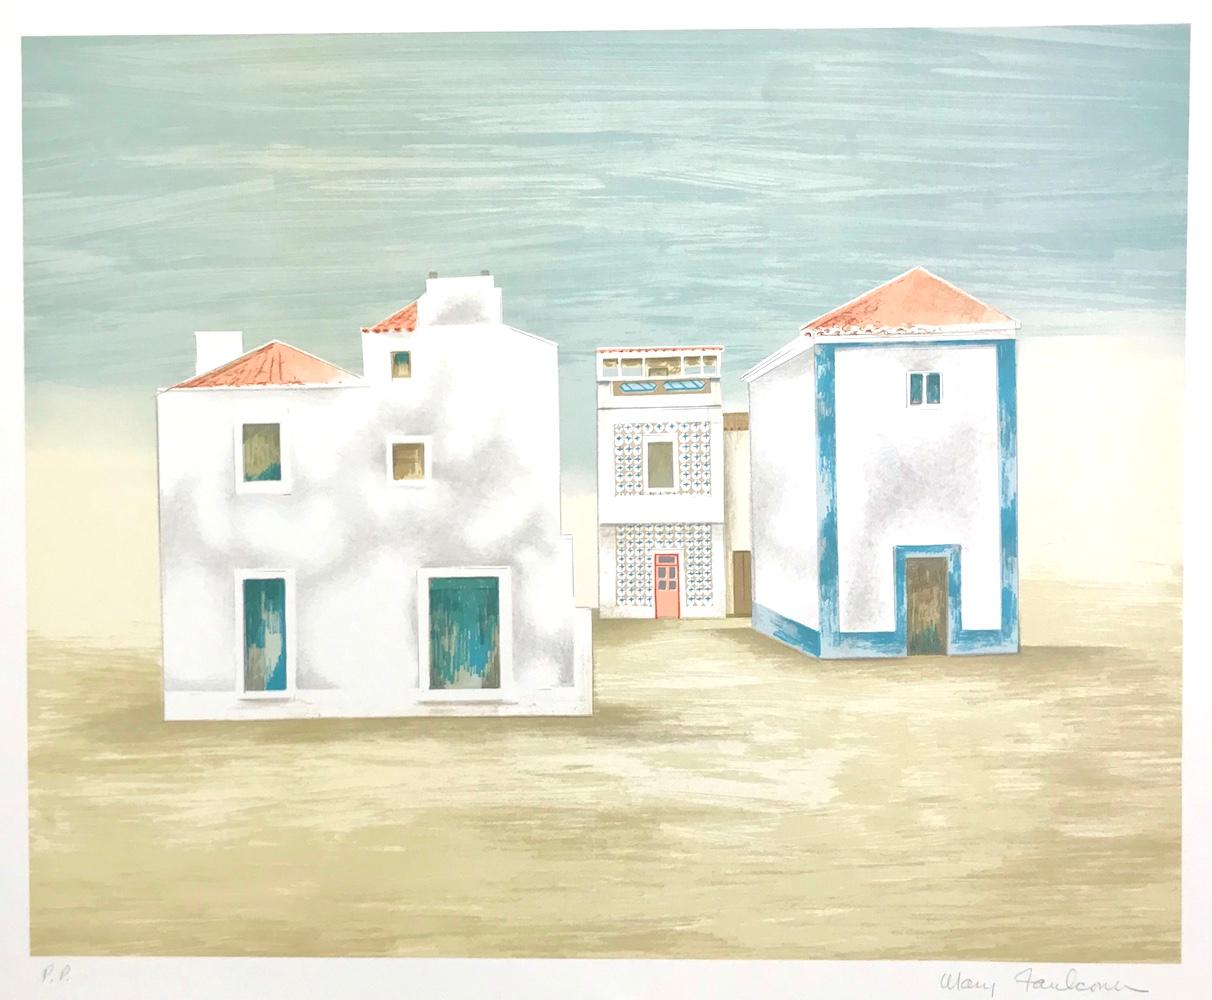 ALGARVE LANDSCAPE Signed Lithograph, Minimalist White Houses, Blue, Beige, Gray - Print by Mary Faulconer